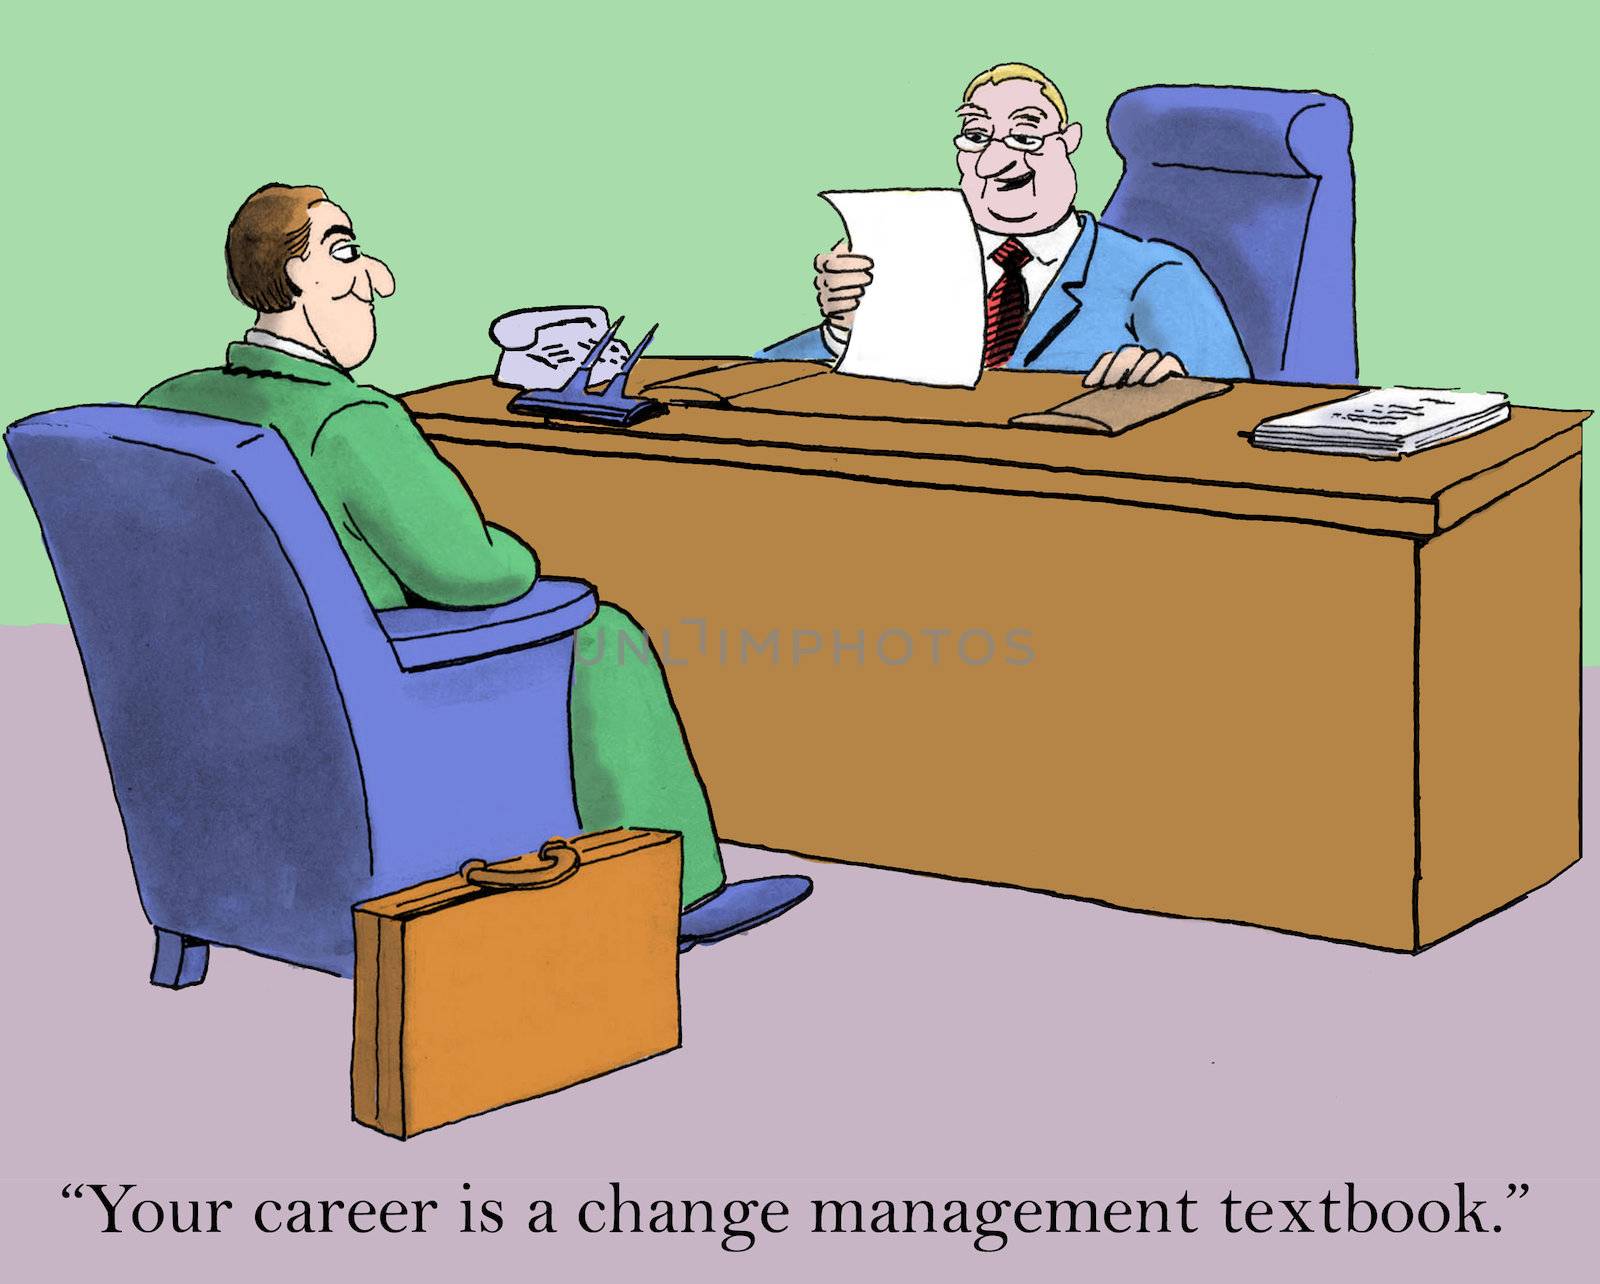 "Your career is a change management textbook."